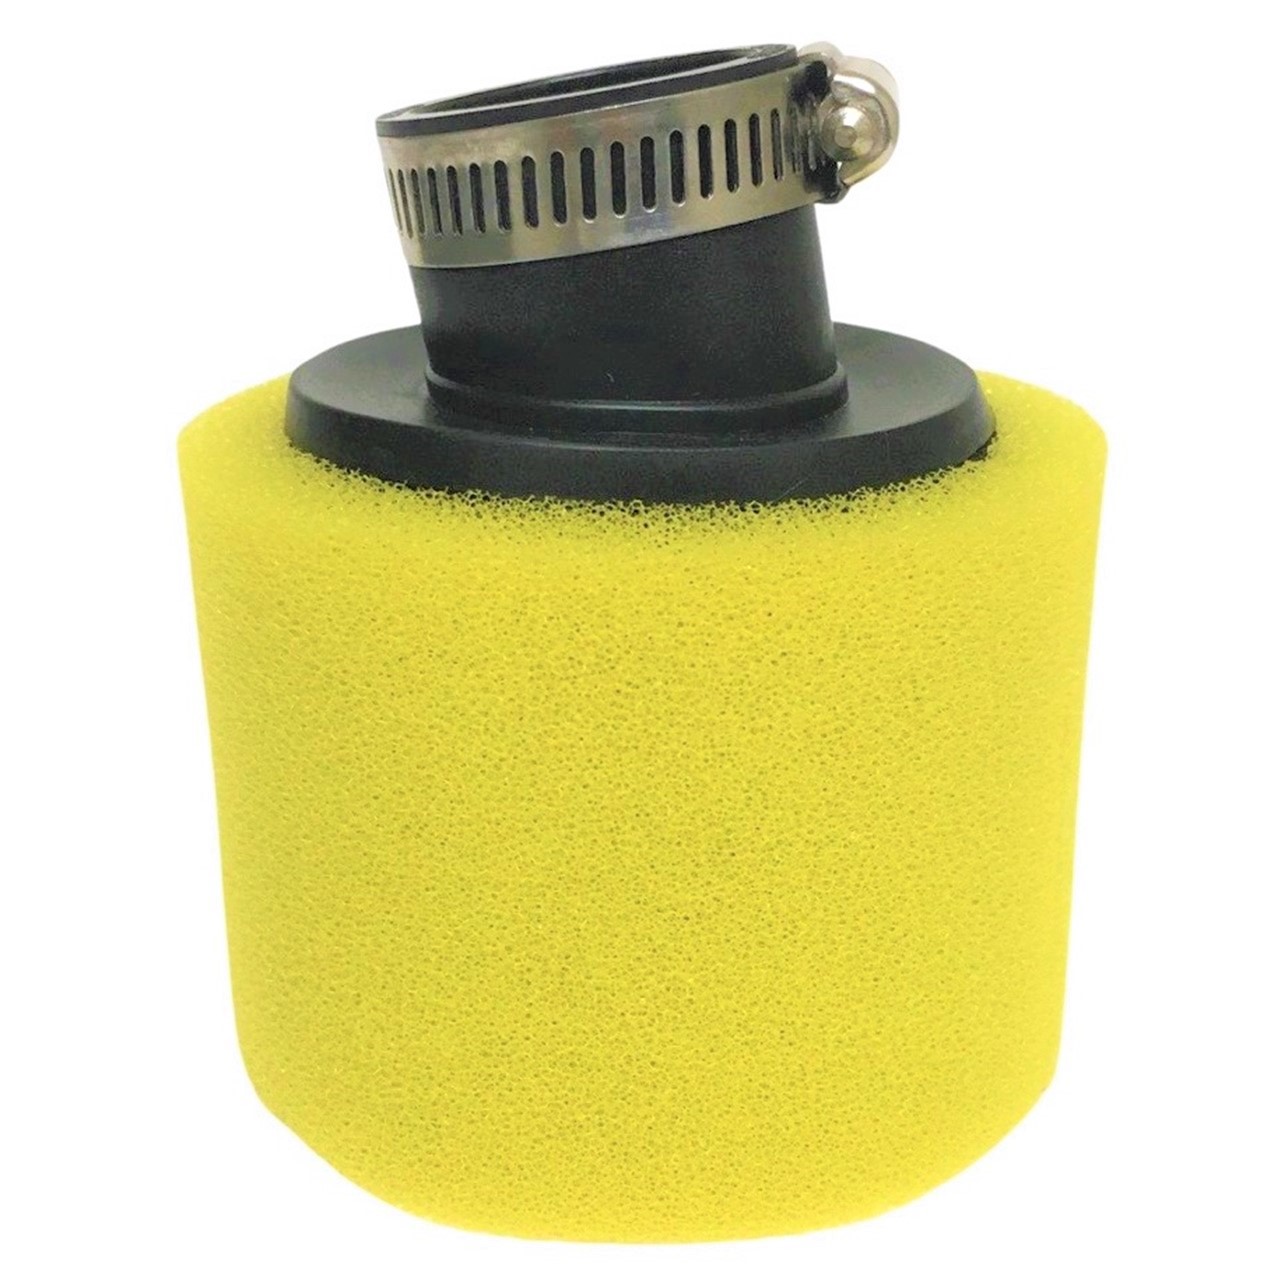 Air Filter 2 Stage ID=35mm OD=95 Filter Body Length=75 20deg Angle